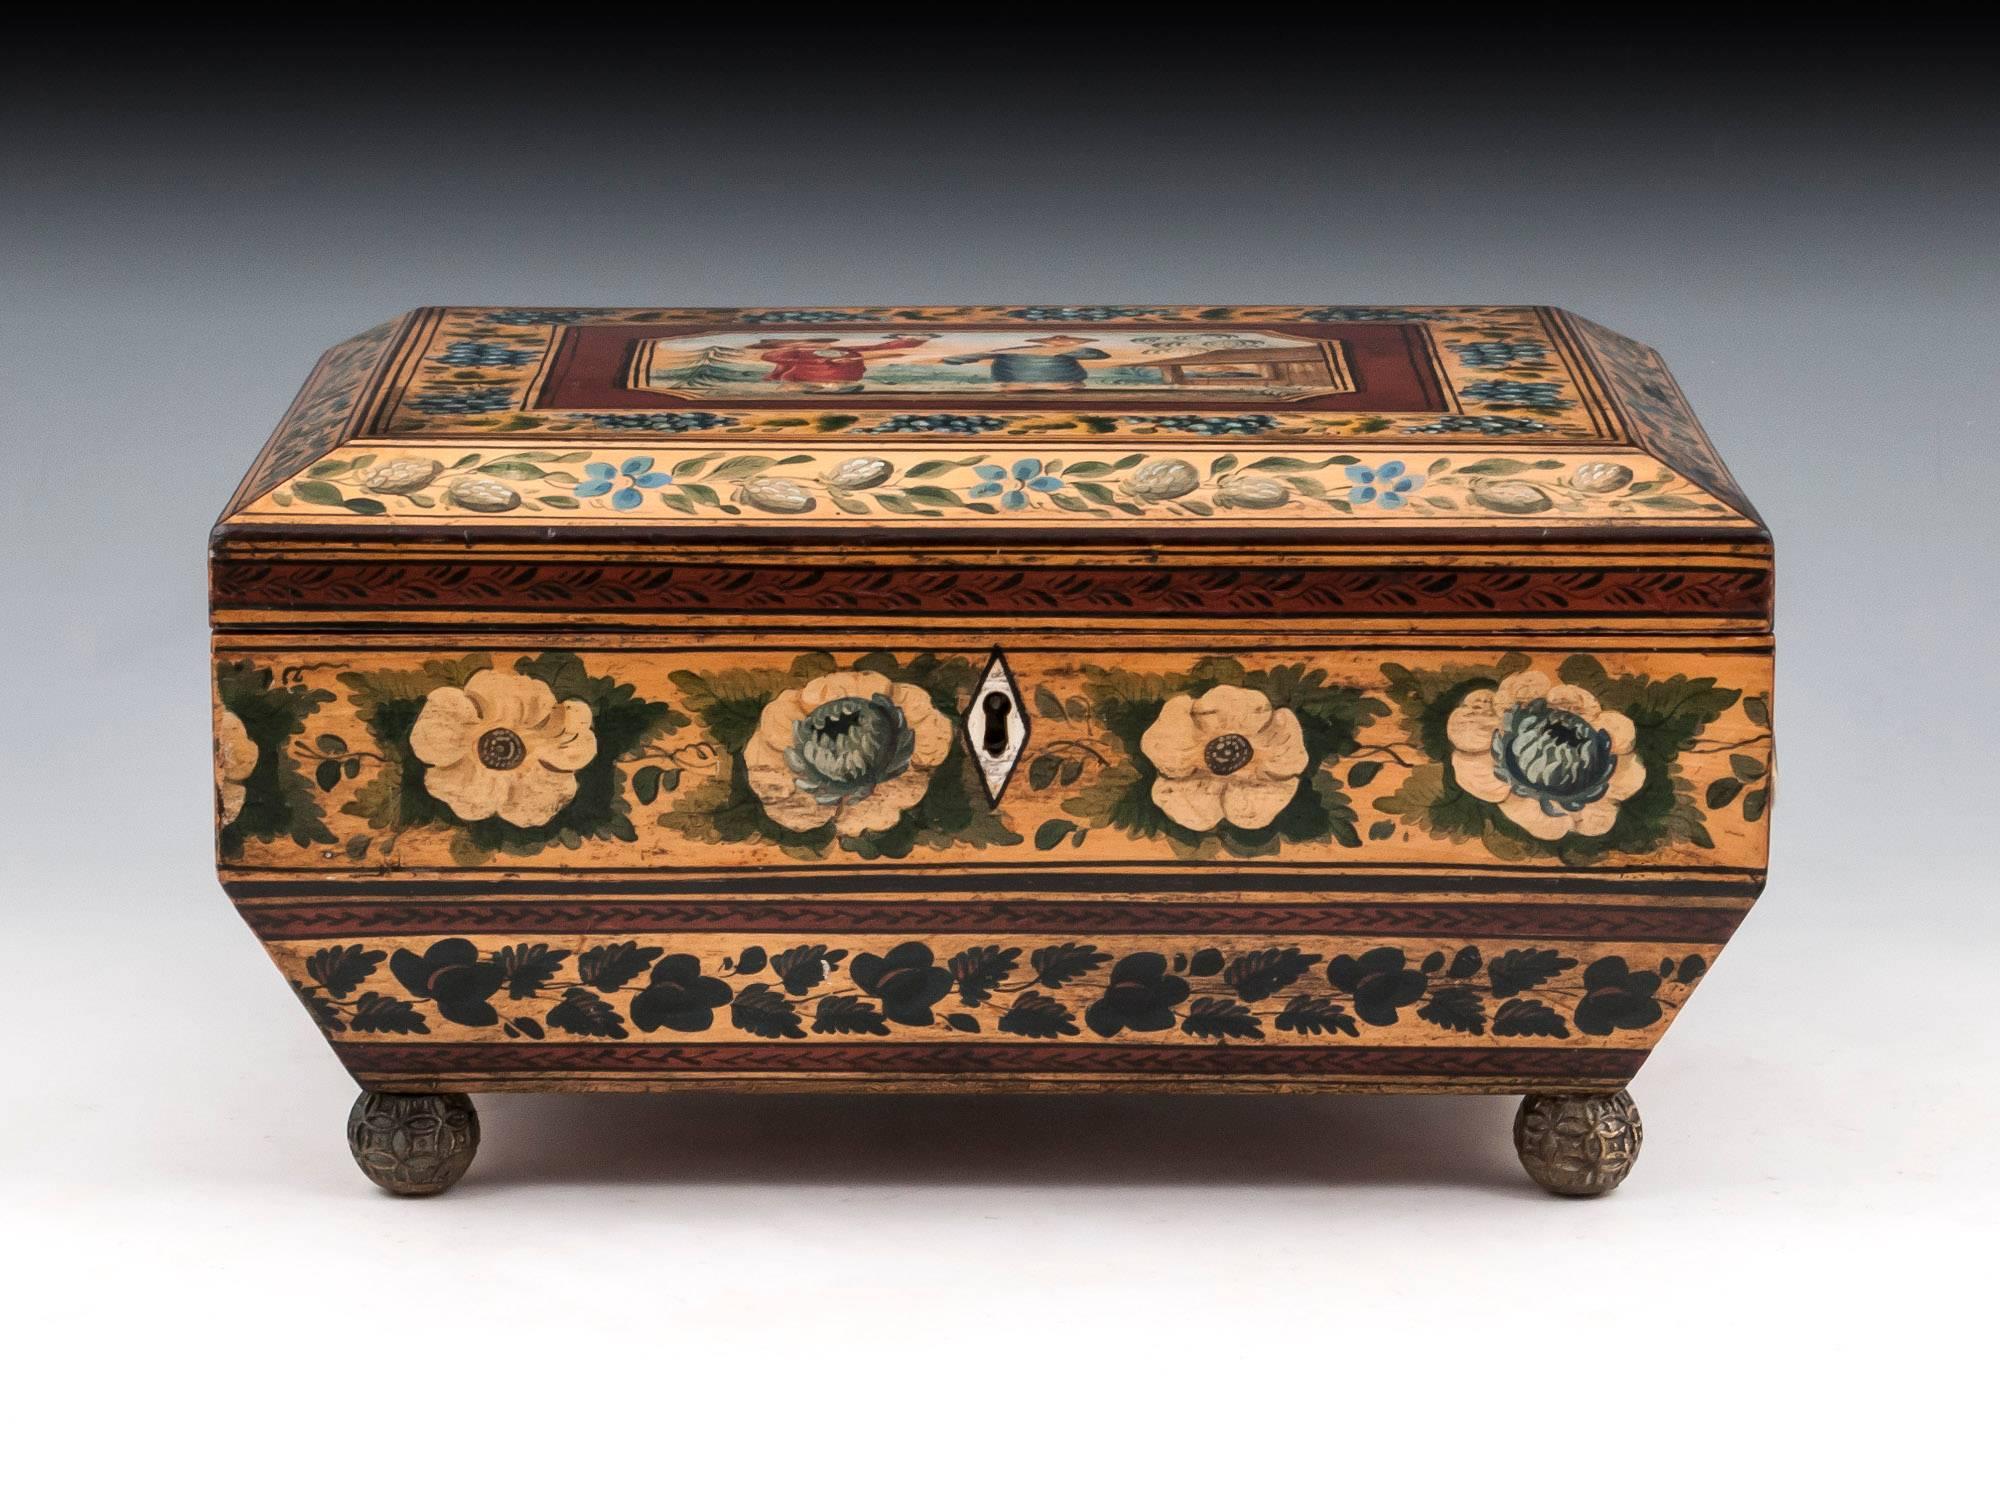 Exquisite penwork chinoiserie sewing box in sycamore, the top decorated with vibrant painted Chinese figures within a pretty grapevine border. The vibrant colours continue on all sides with more fruit and flowers. Lifting the lid of this penwork